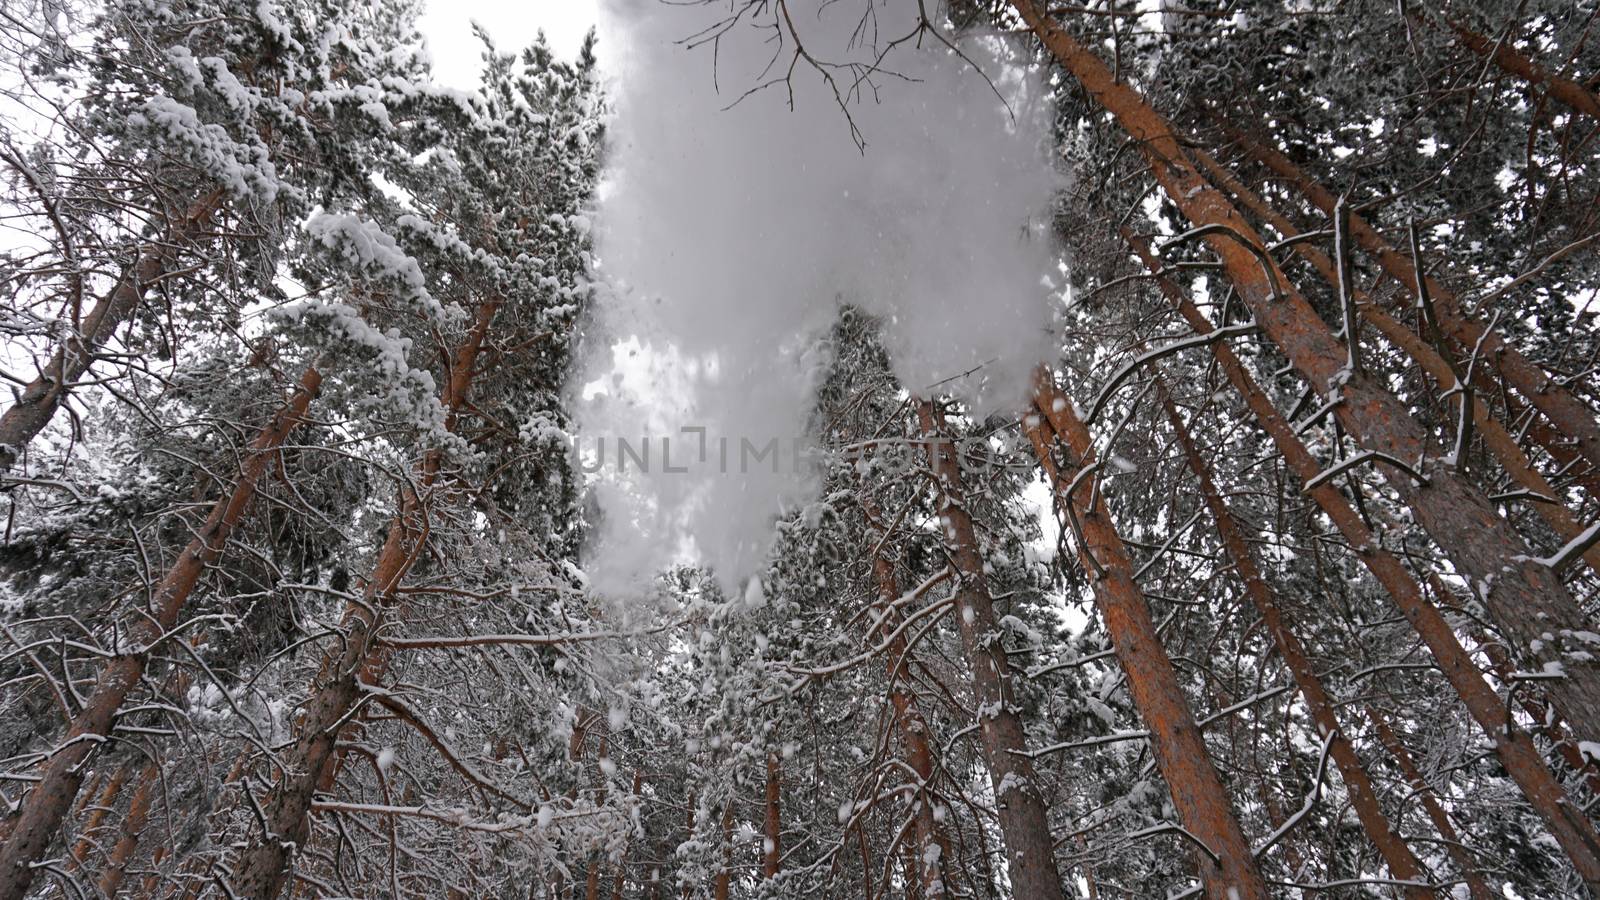 White fluffy snow falls in the forest. Festive mood. Coniferous trees are covered with snow. Branches in the snow. Big drifts around. Winter fairy tale in the Tien Shan mountains, Kazakhstan, Almaty